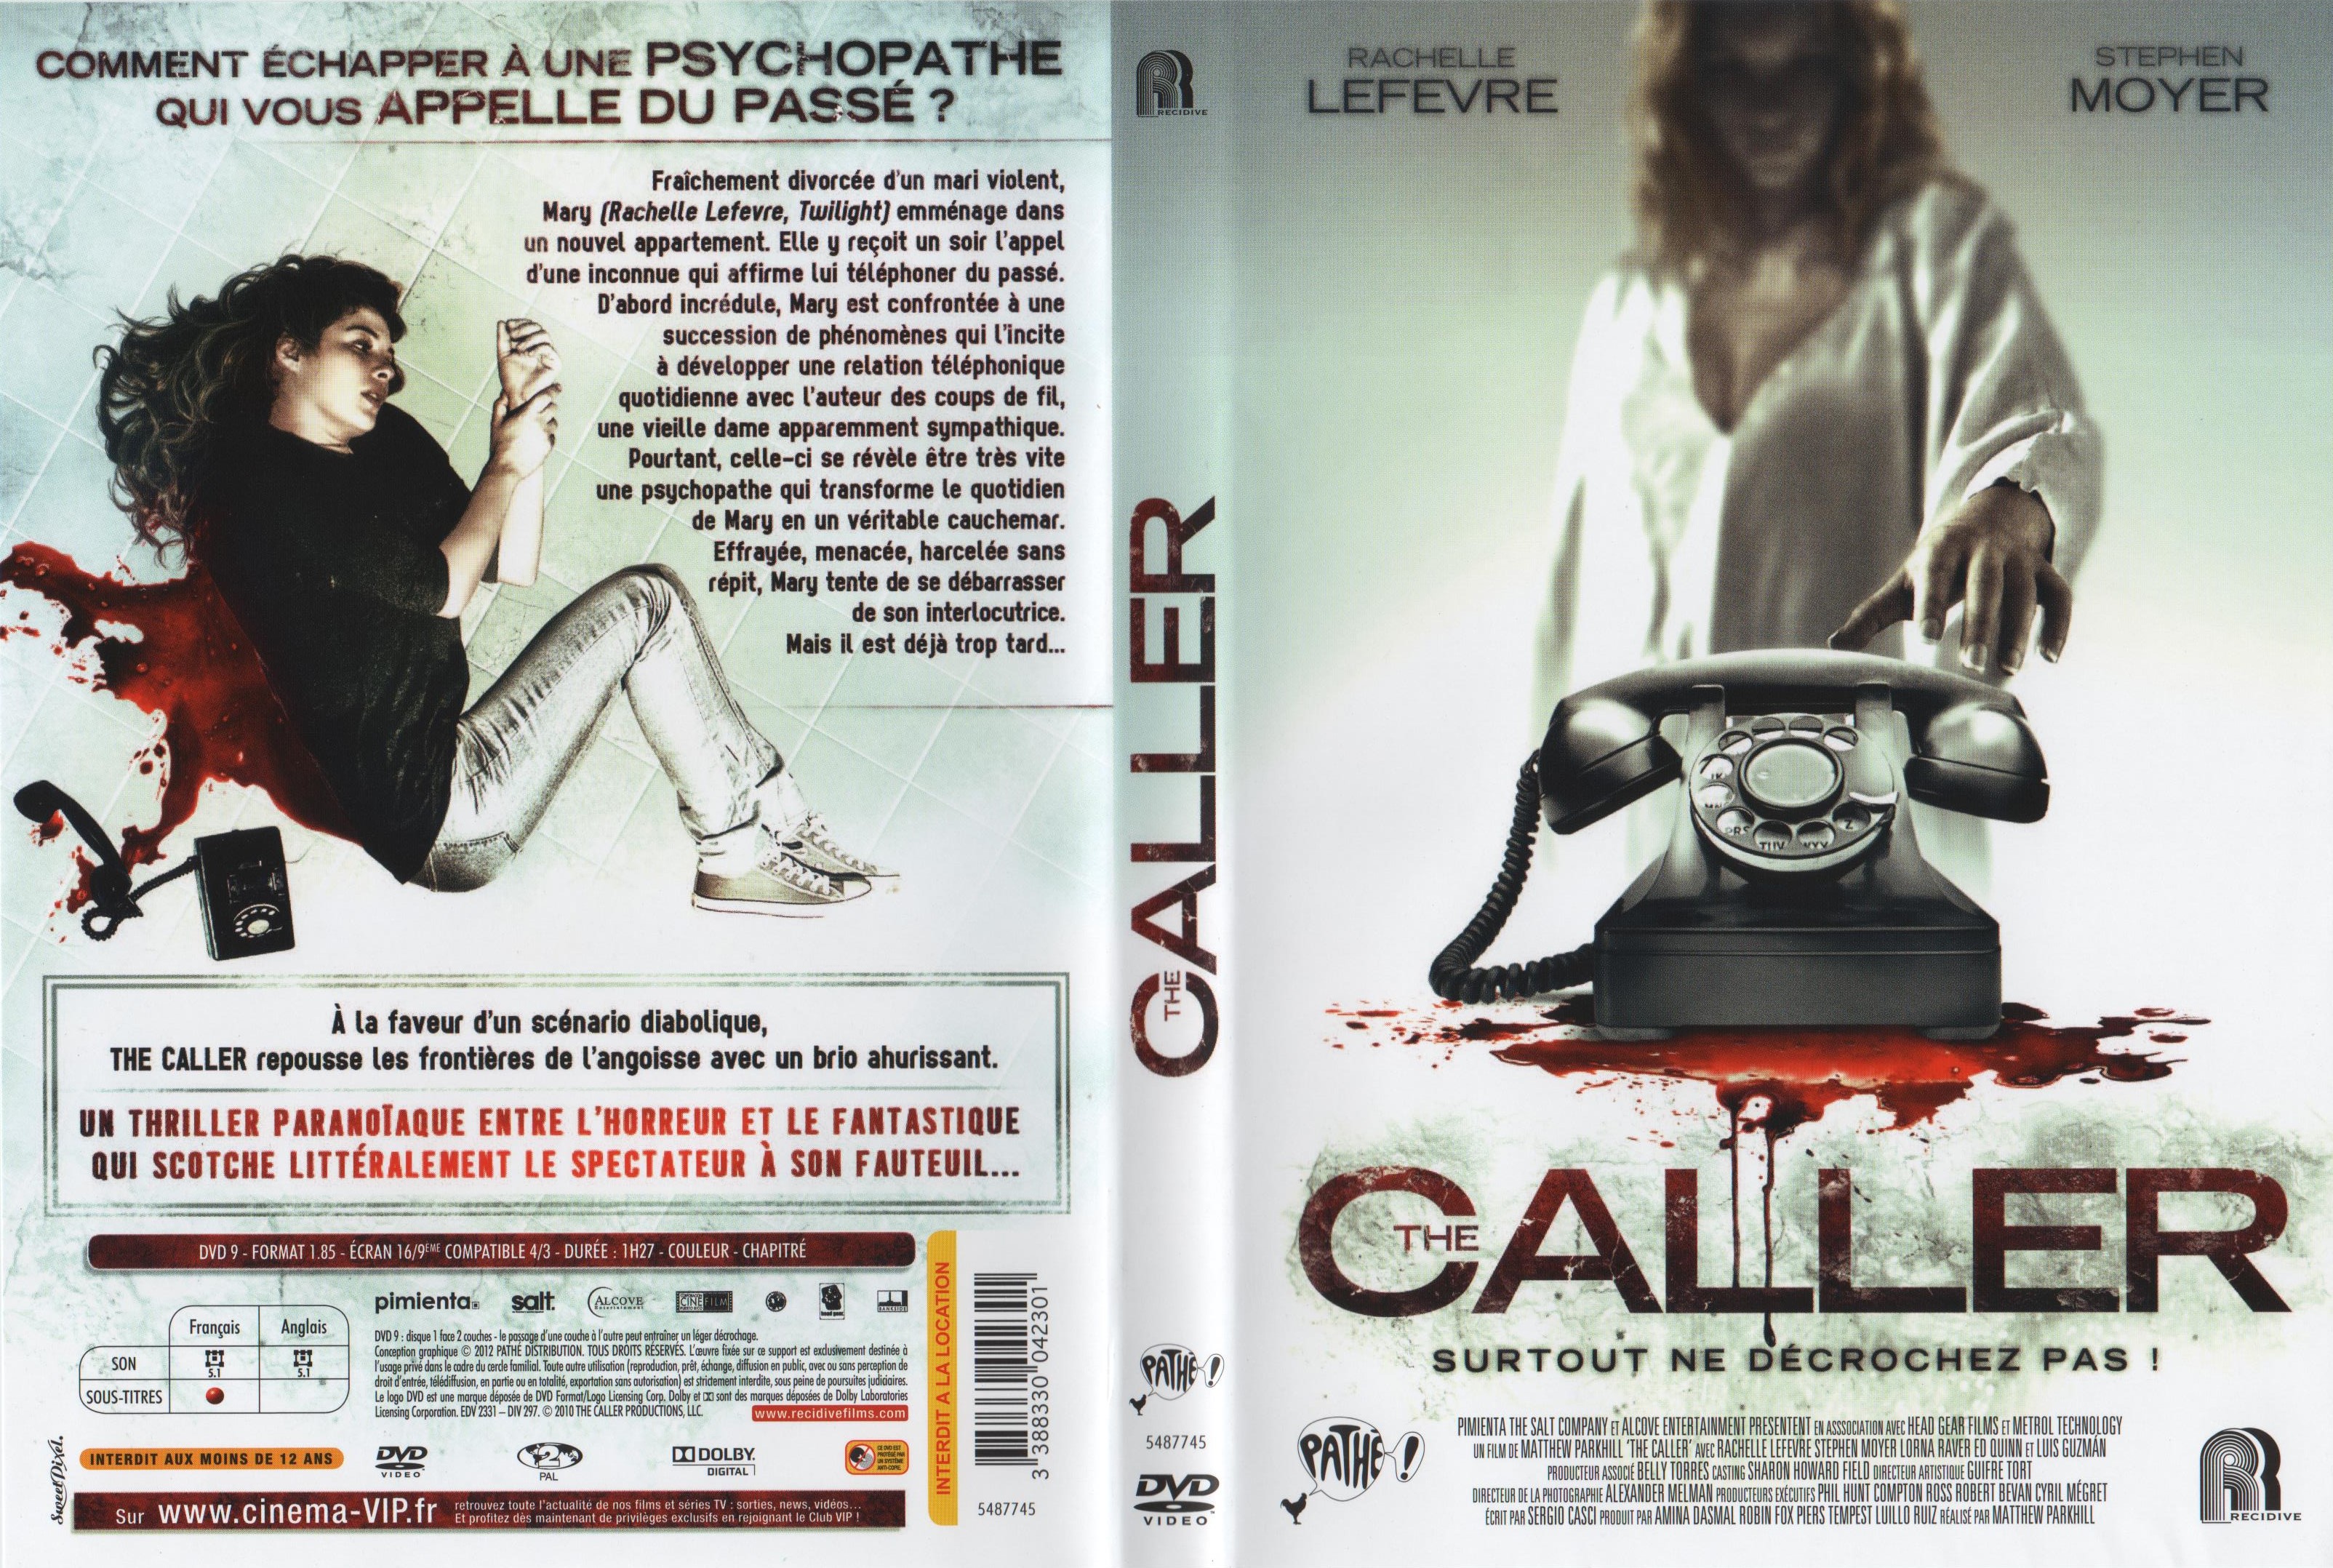 Jaquette DVD The caller